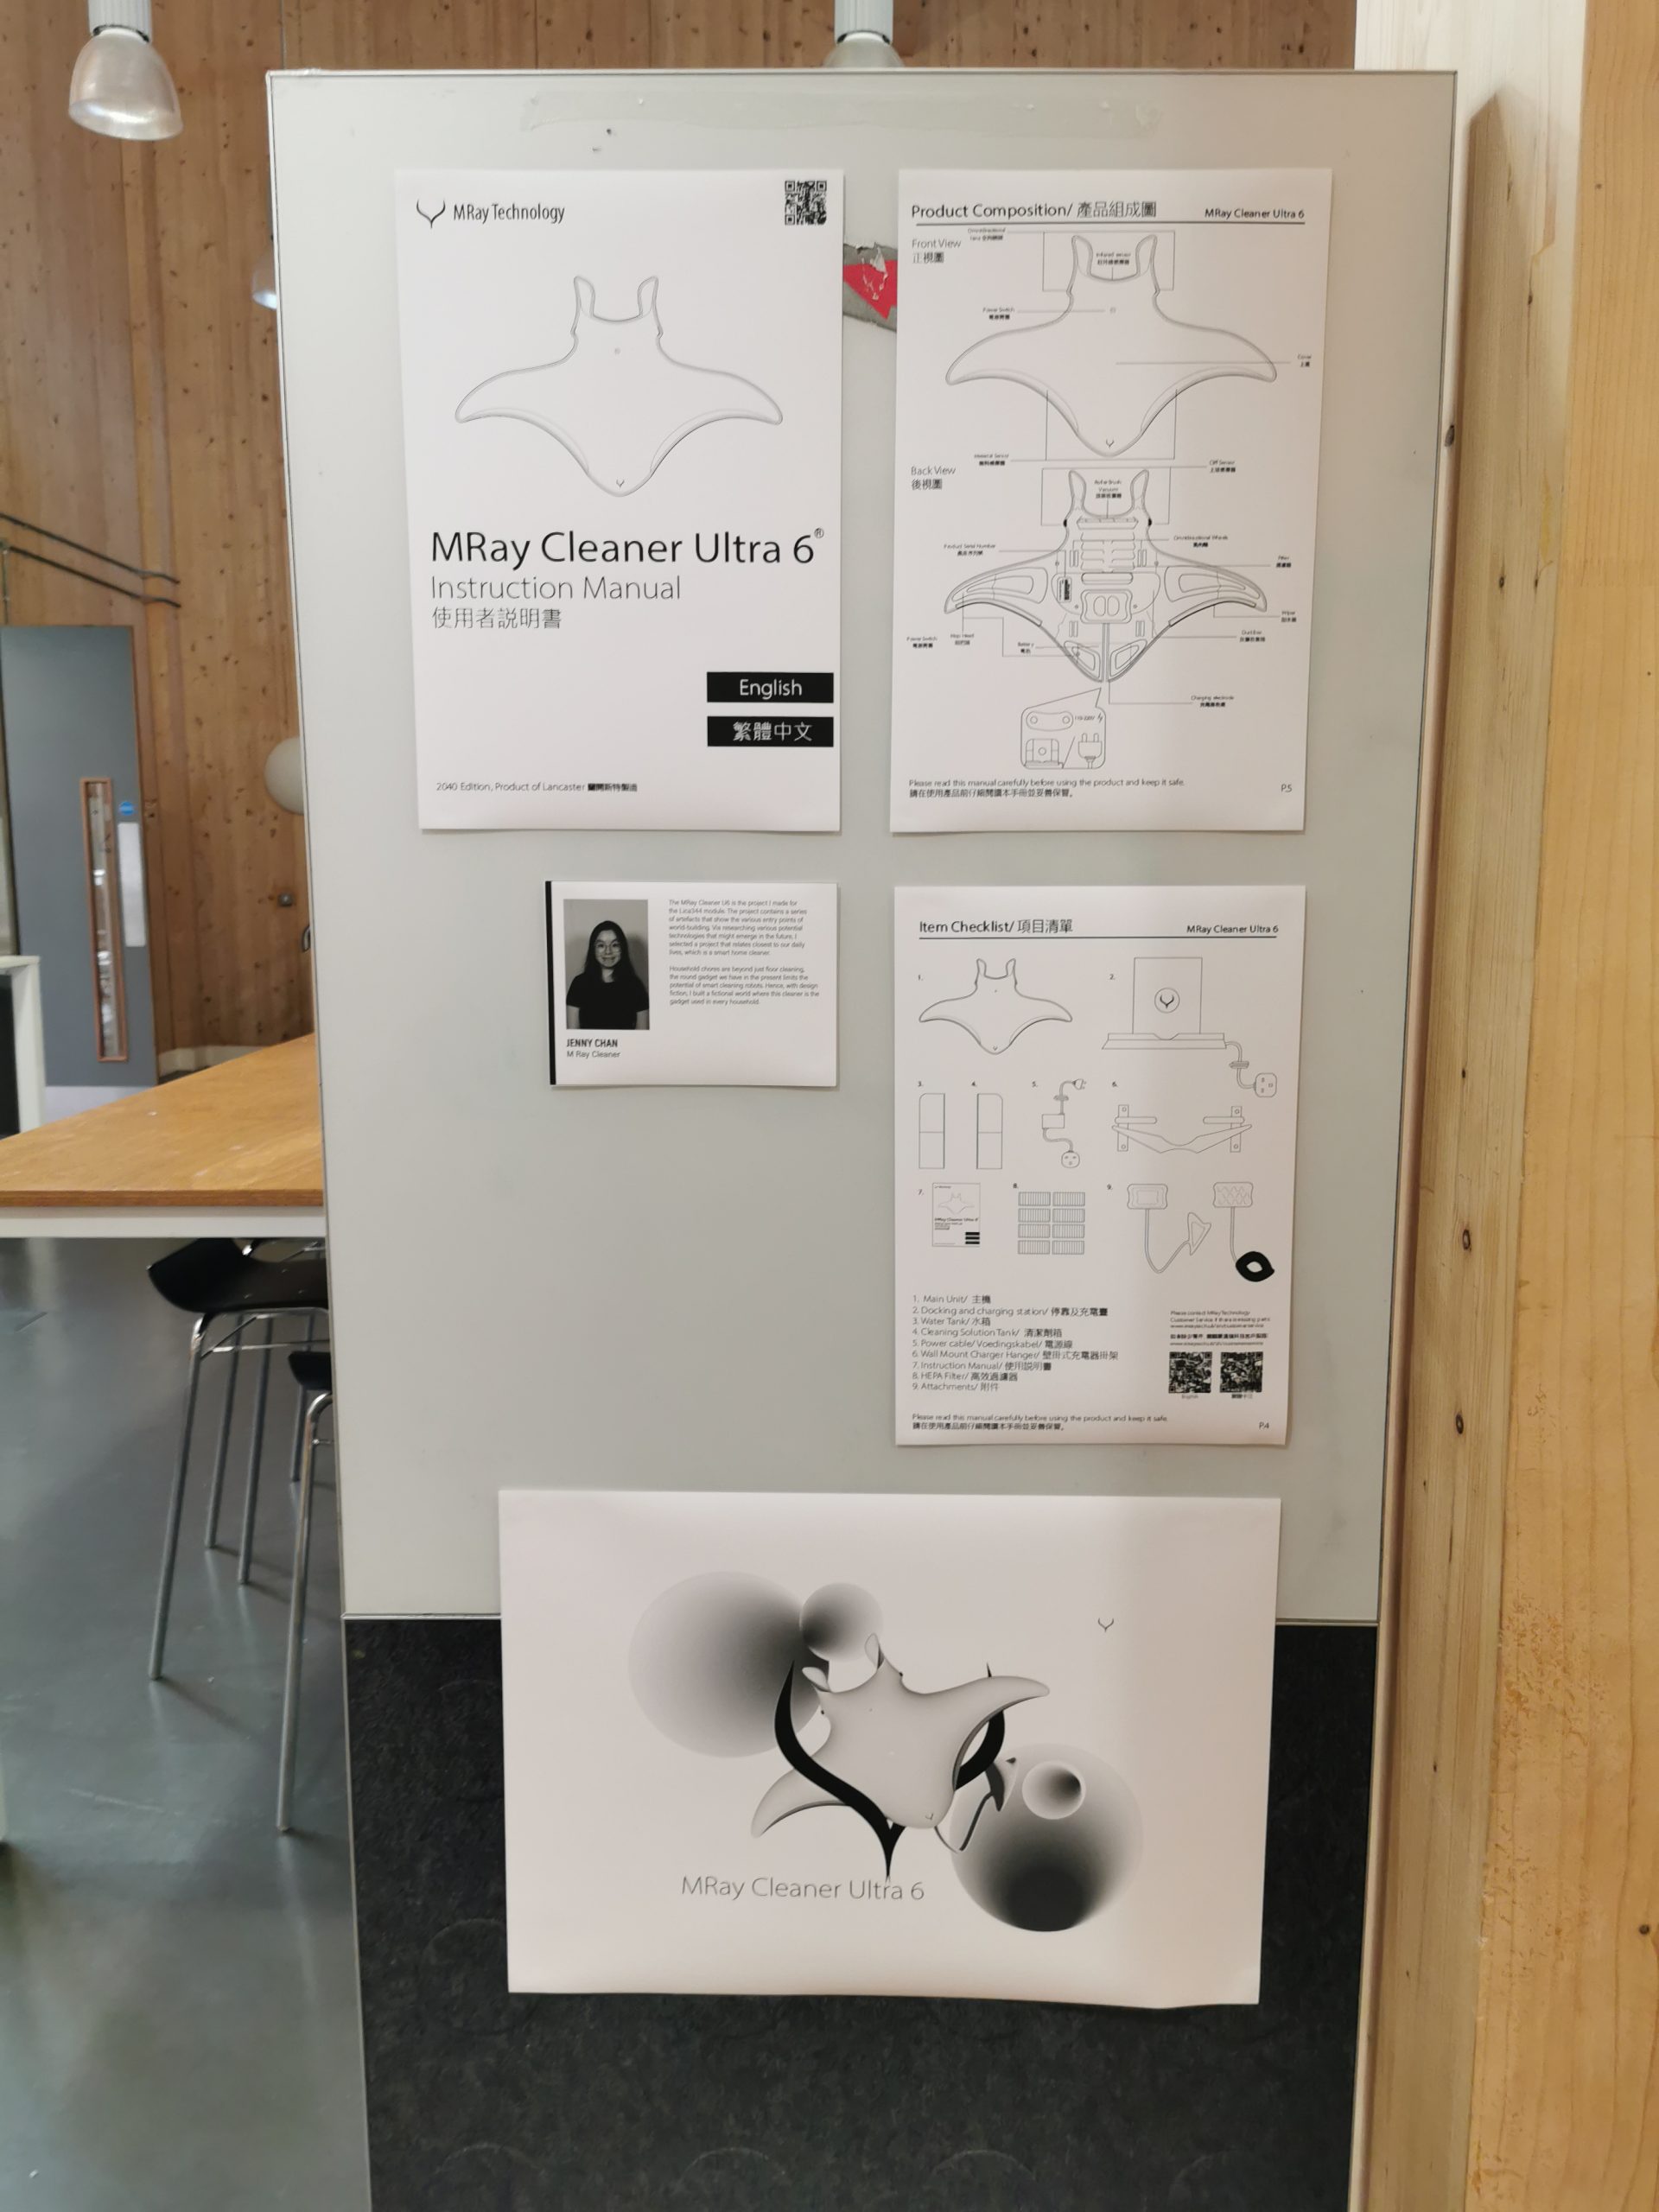 Images from LICA Degree Show 